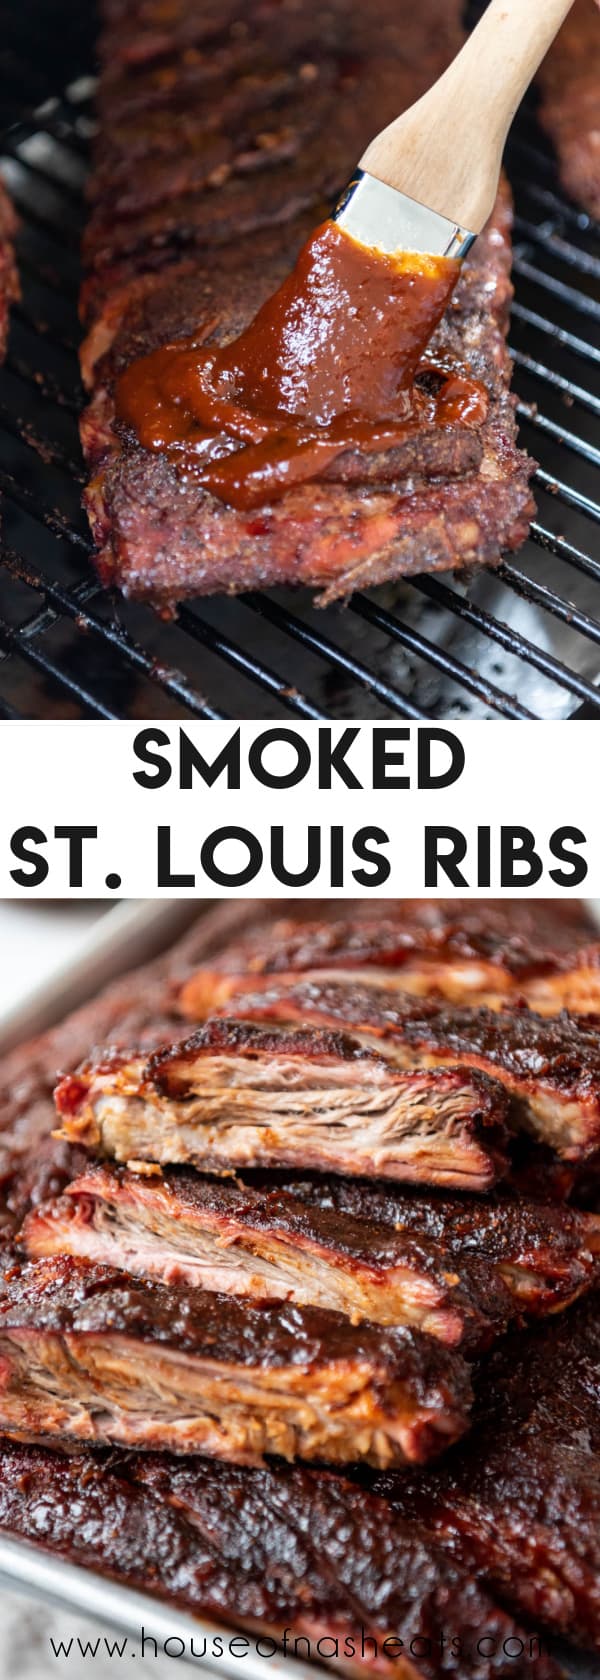 A collage of images of smoked St Louis style bbq ribs with text overlay.